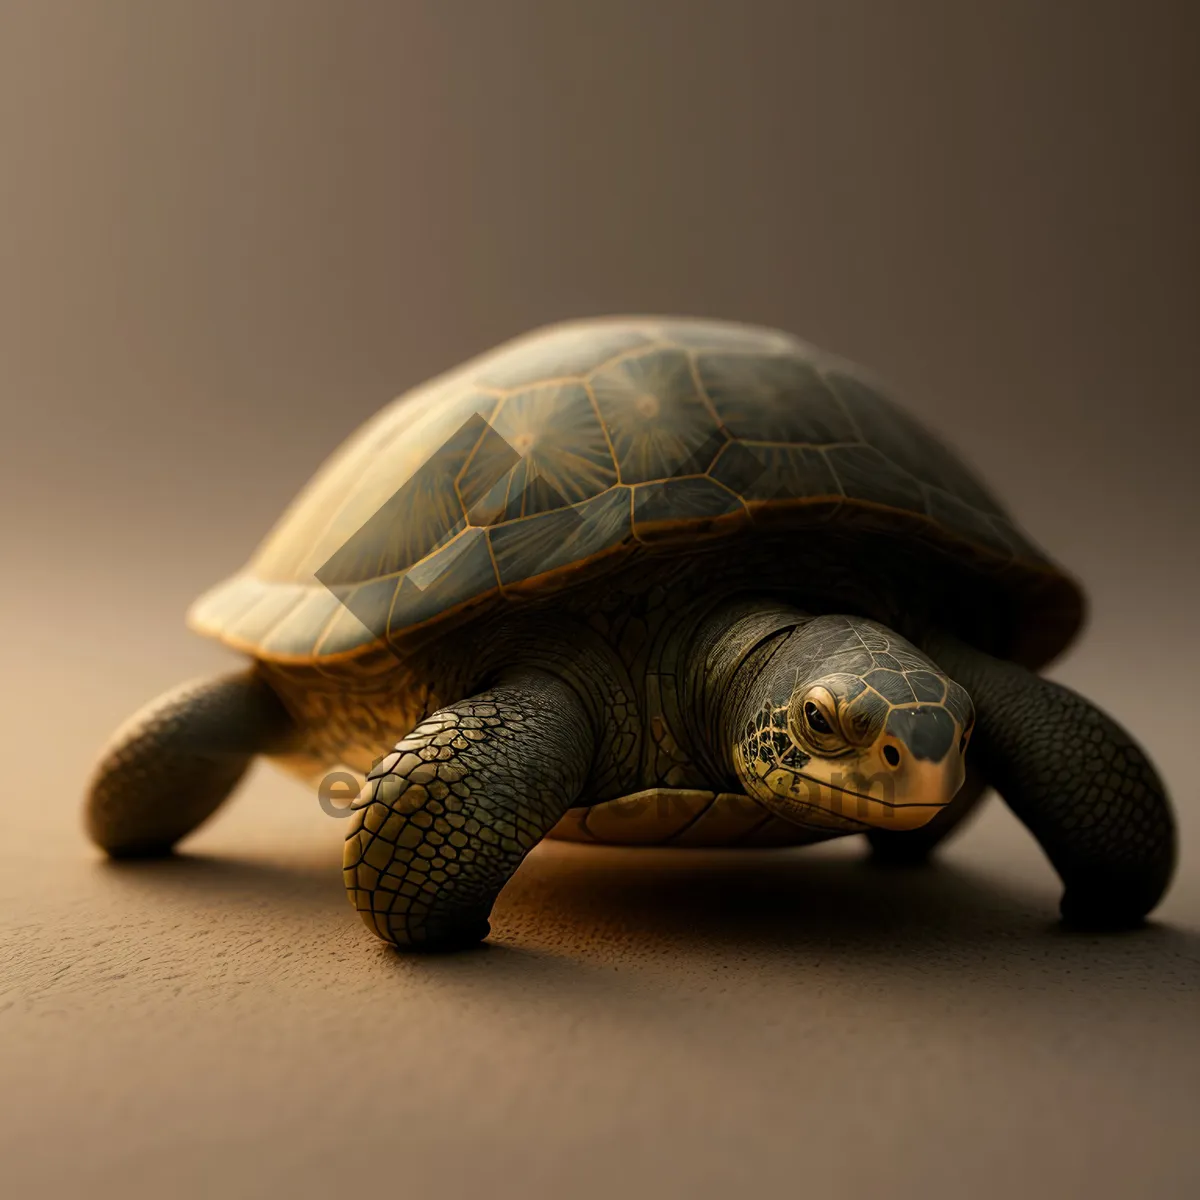 Picture of Terrapin Turtle: Slow-moving Reptile with a Hardy Shell